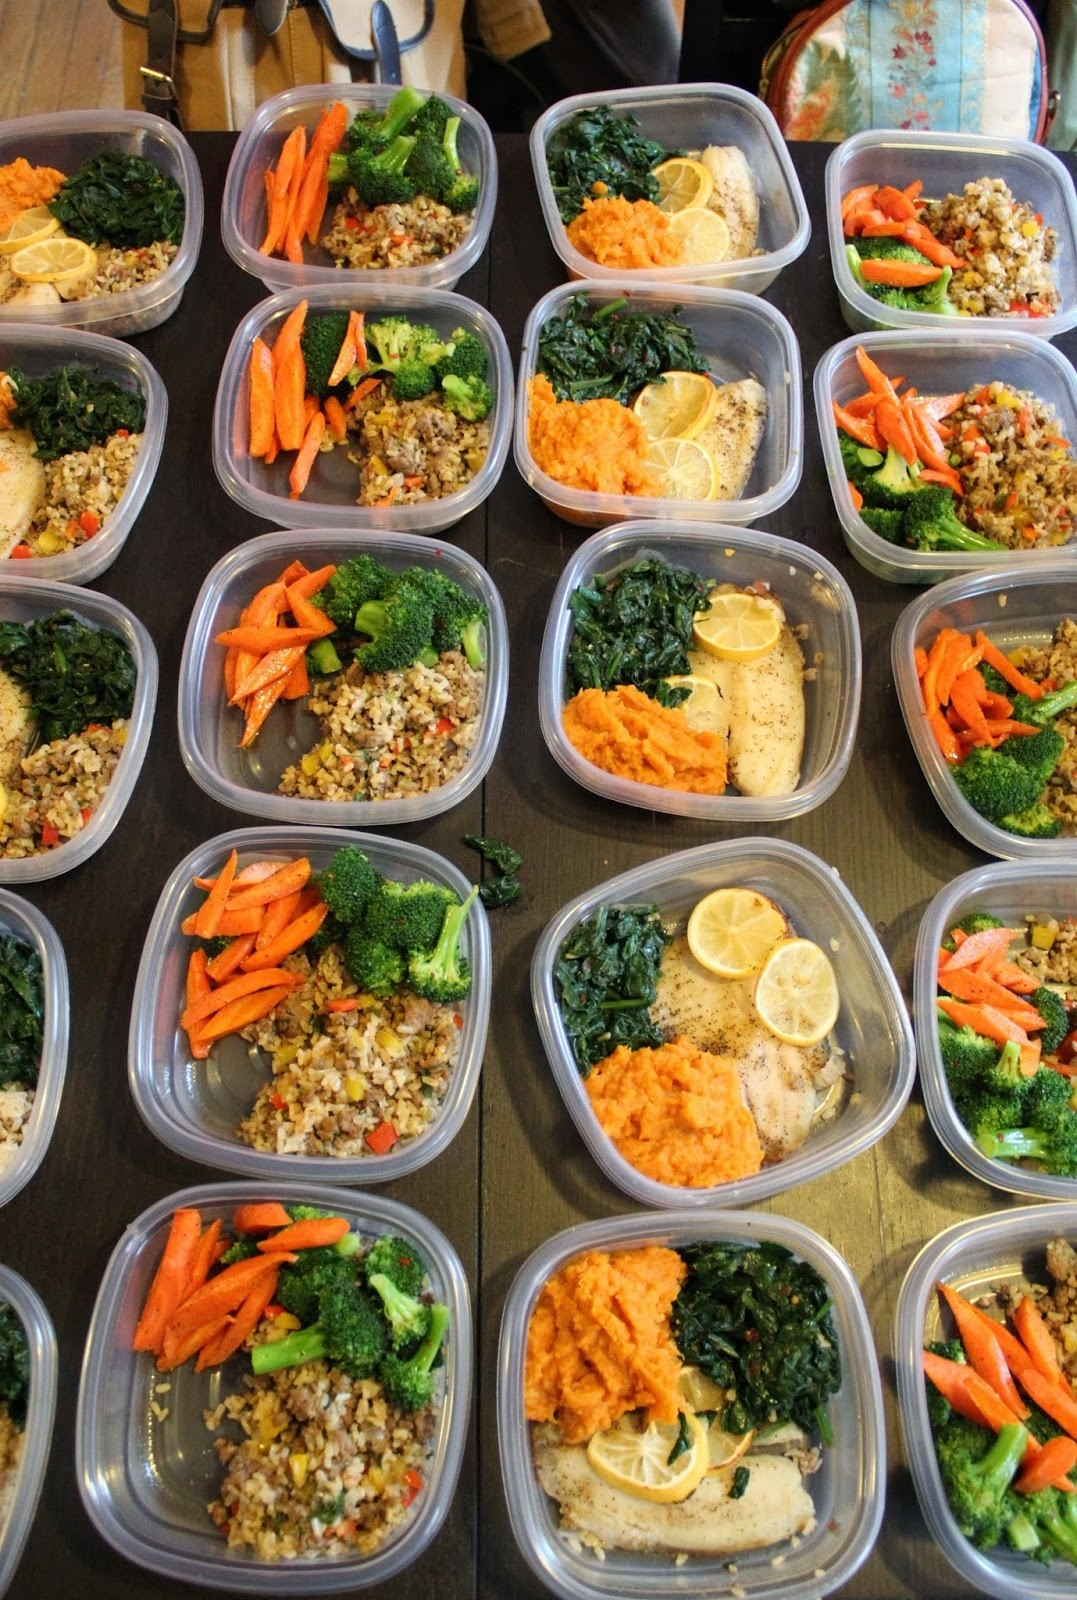 Healthy Diet Dinners
 Healthy Meal Prep Ideas For The WeekWritings and Papers